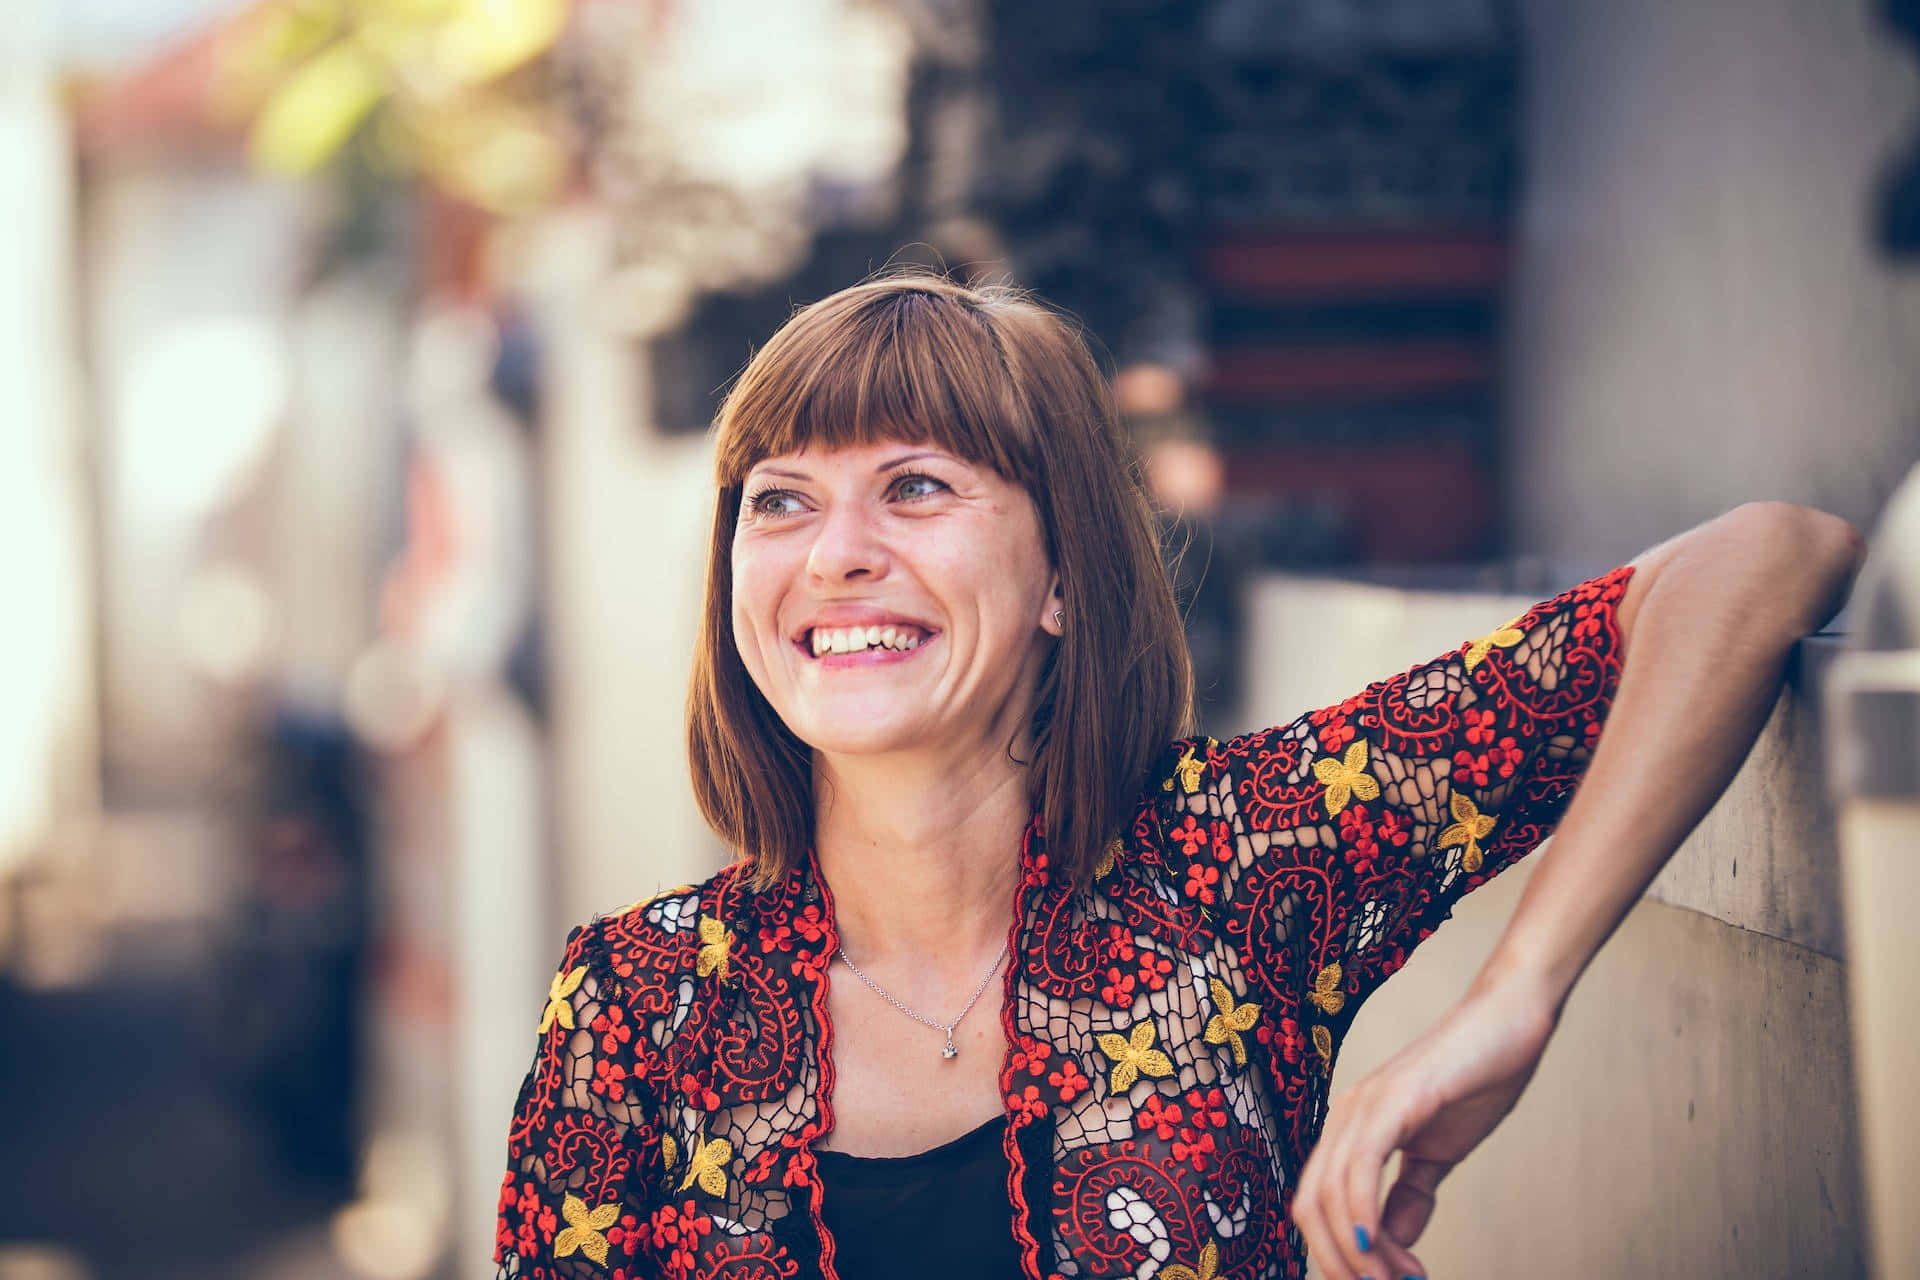 Middle Aged Woman With Bangs Smile Wallpaper